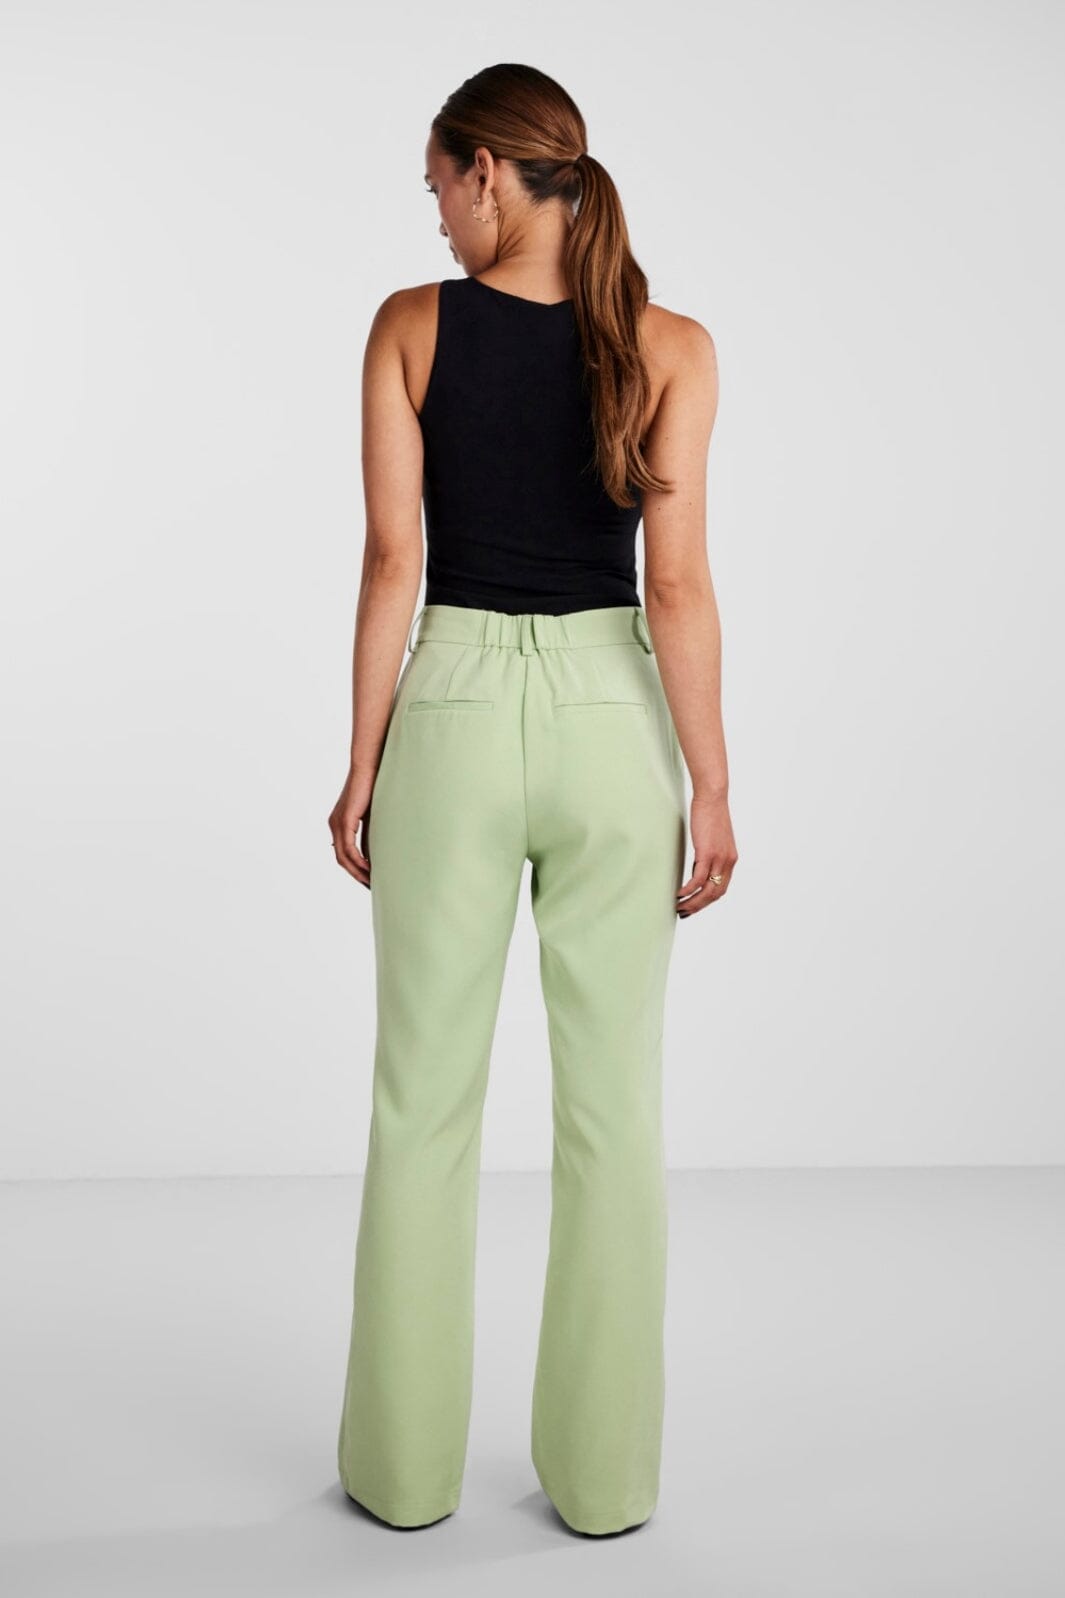 Y.A.S - Yasvala Flared Pant Show - Quiet Green Bukser 